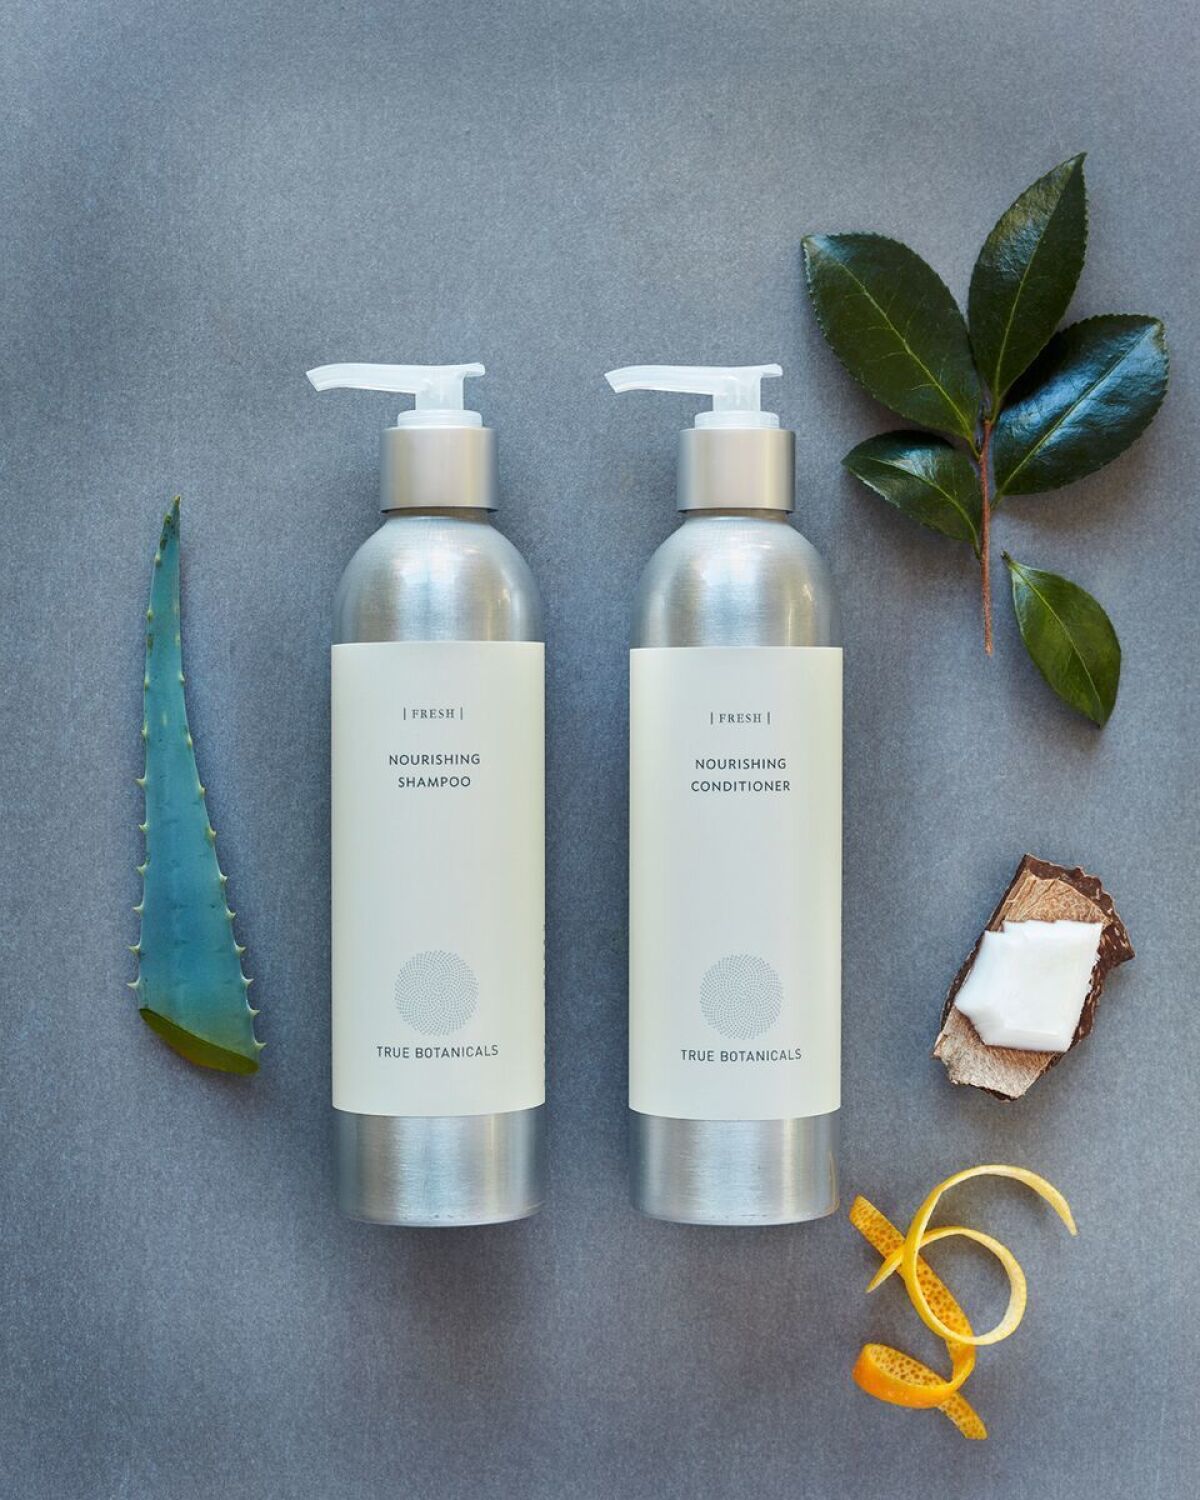 True Botanicals' Fresh Nourishing Shampoo includes green tea oil for its antioxidant properties, while the Nourishing Conditioner includes macadamia seed oil and shea butter. The shampoo and conditioner are $34 each.